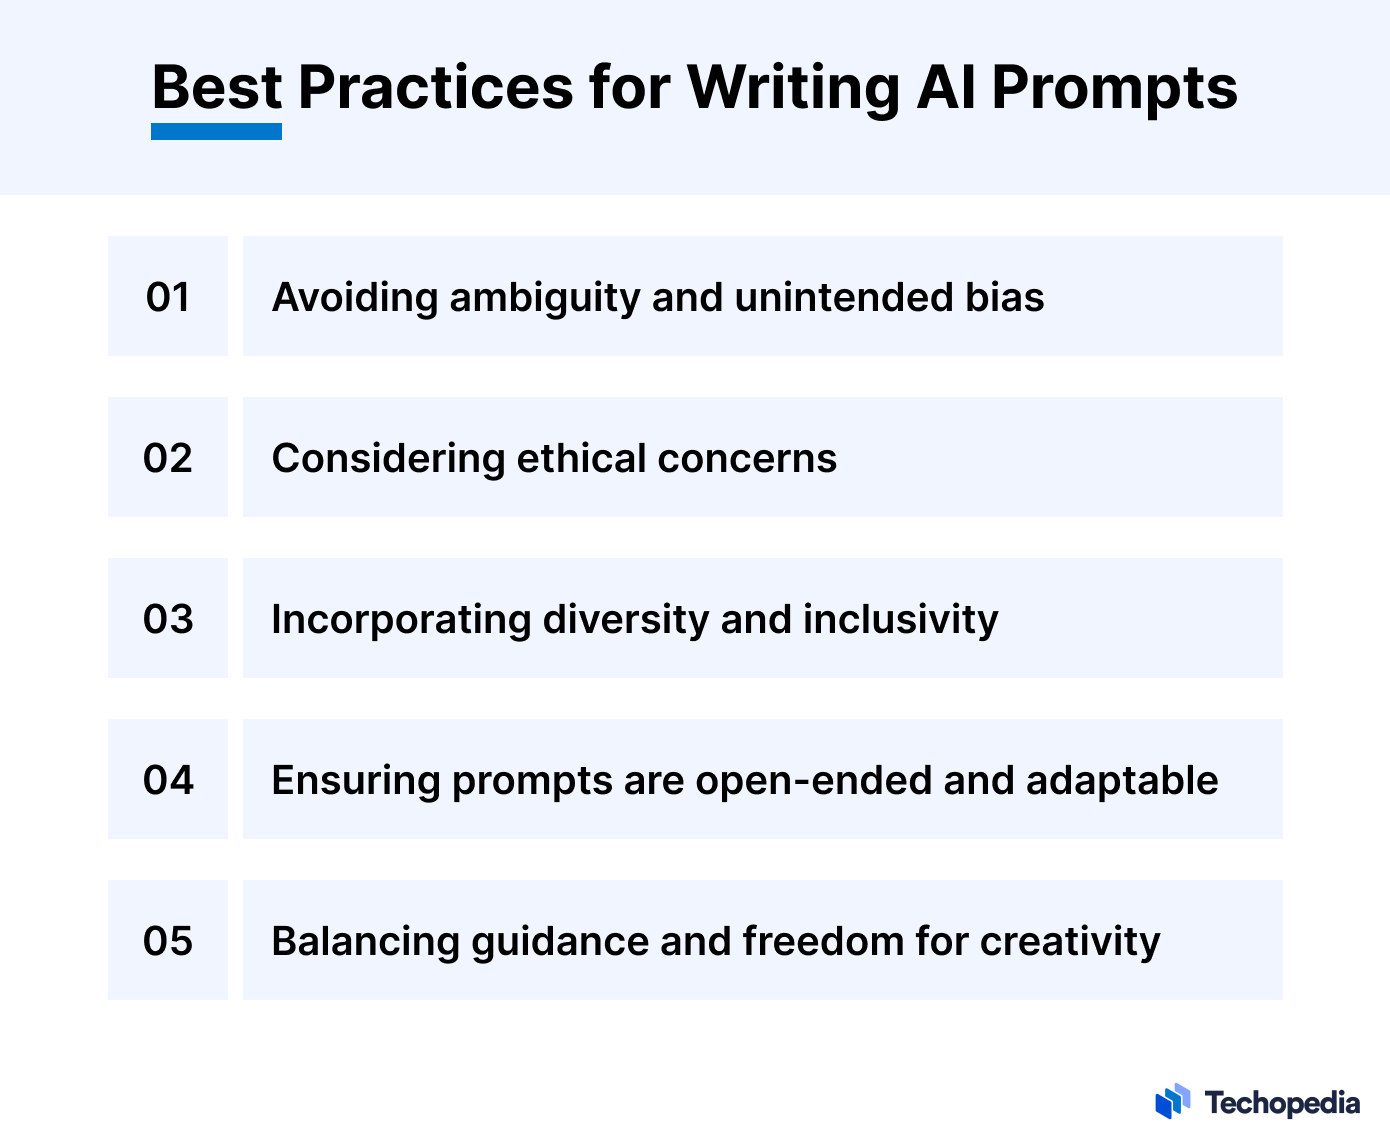 Best Practices for Writing AI Prompts